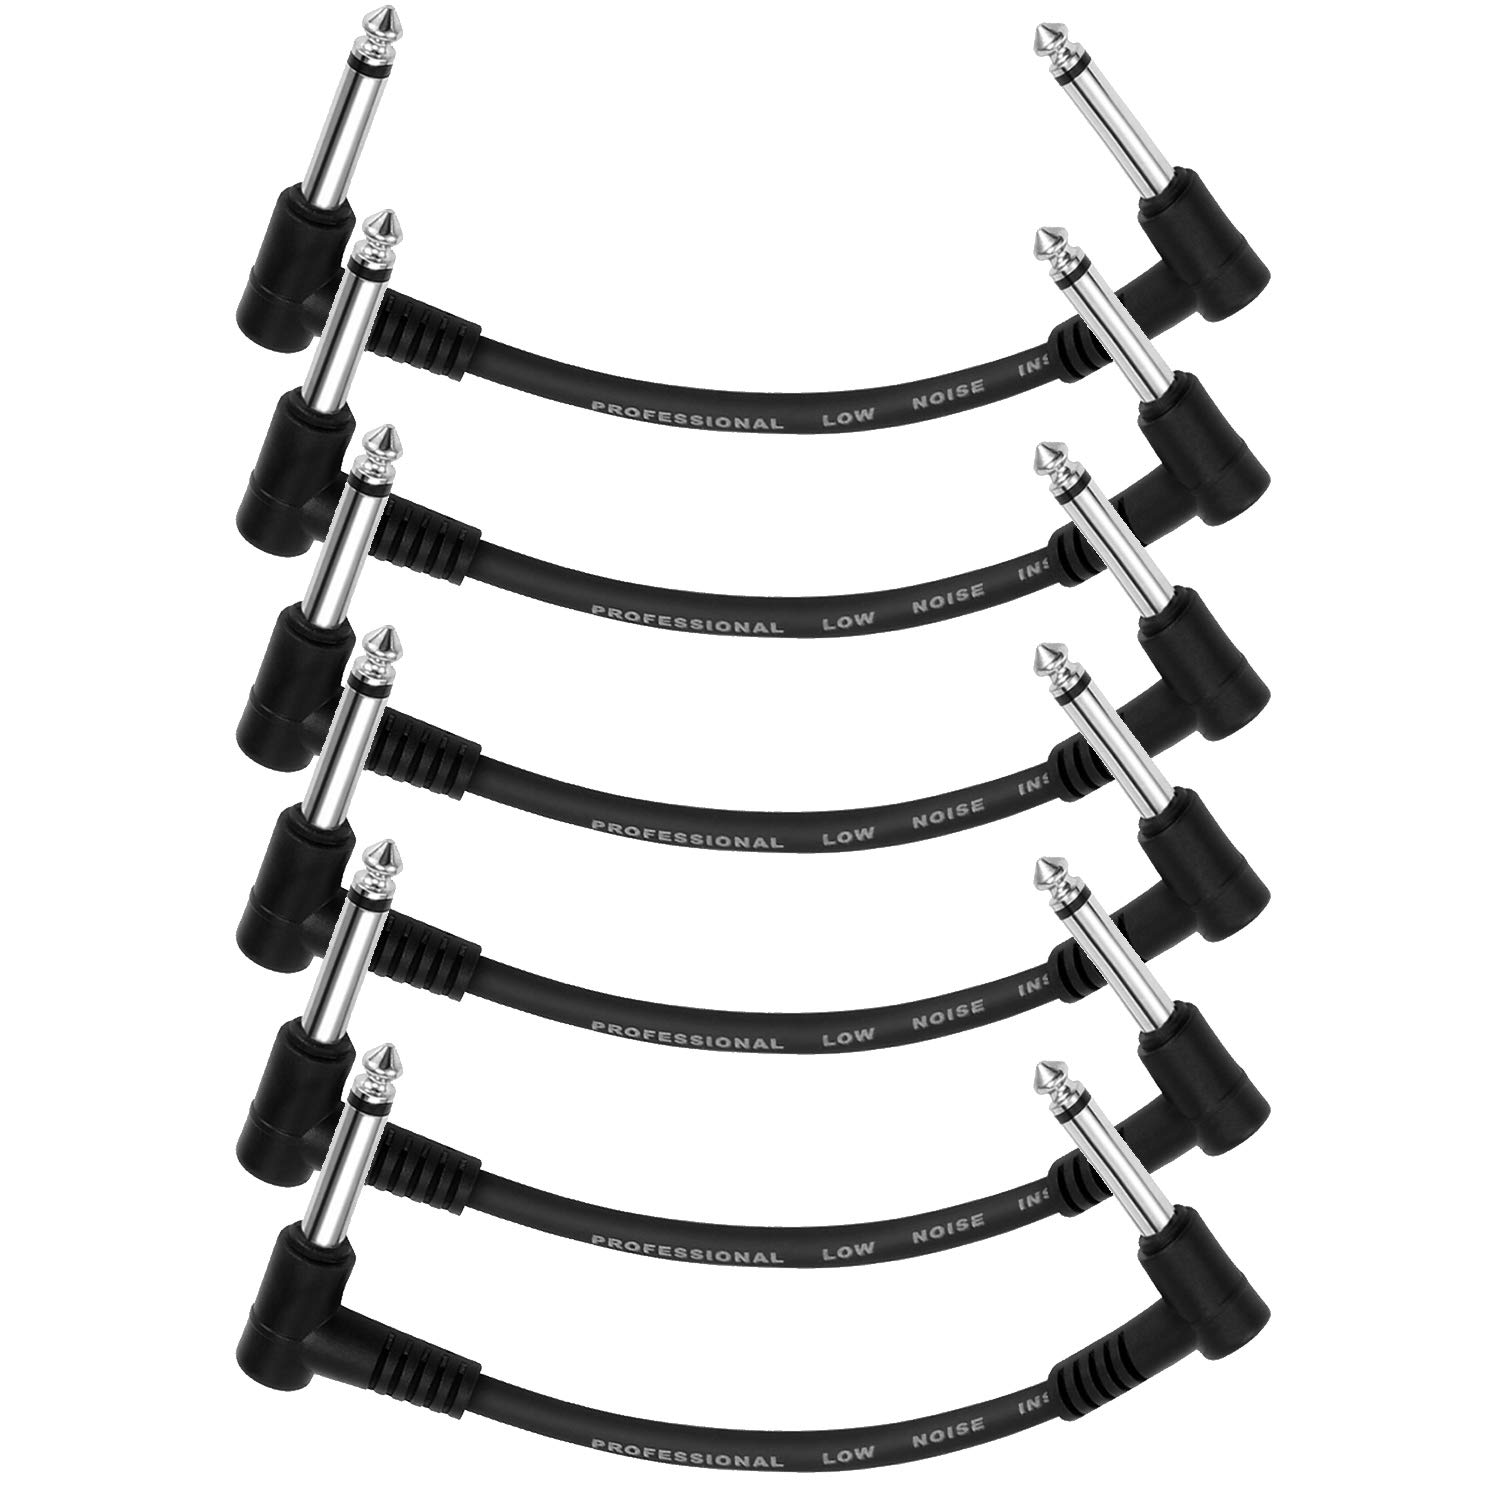 Book Cover Donner 6 Inch Guitar Patch Cable Guitar Effect Pedal Cables Black 6 Pack 6 Inch-6 Pack Black